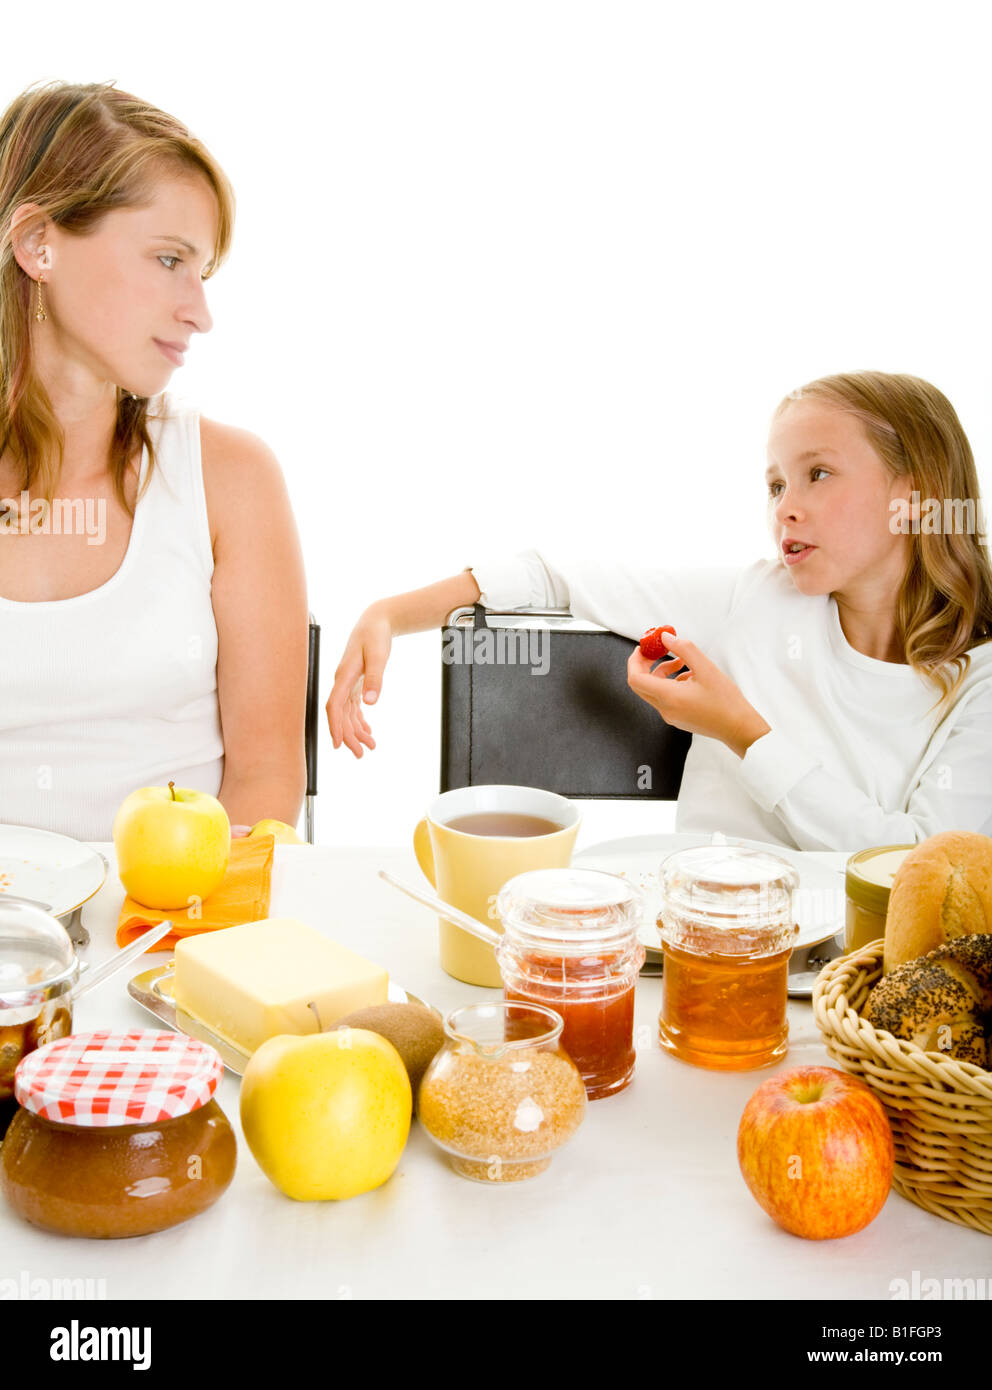 mother and daughter breakfast Stock Photo